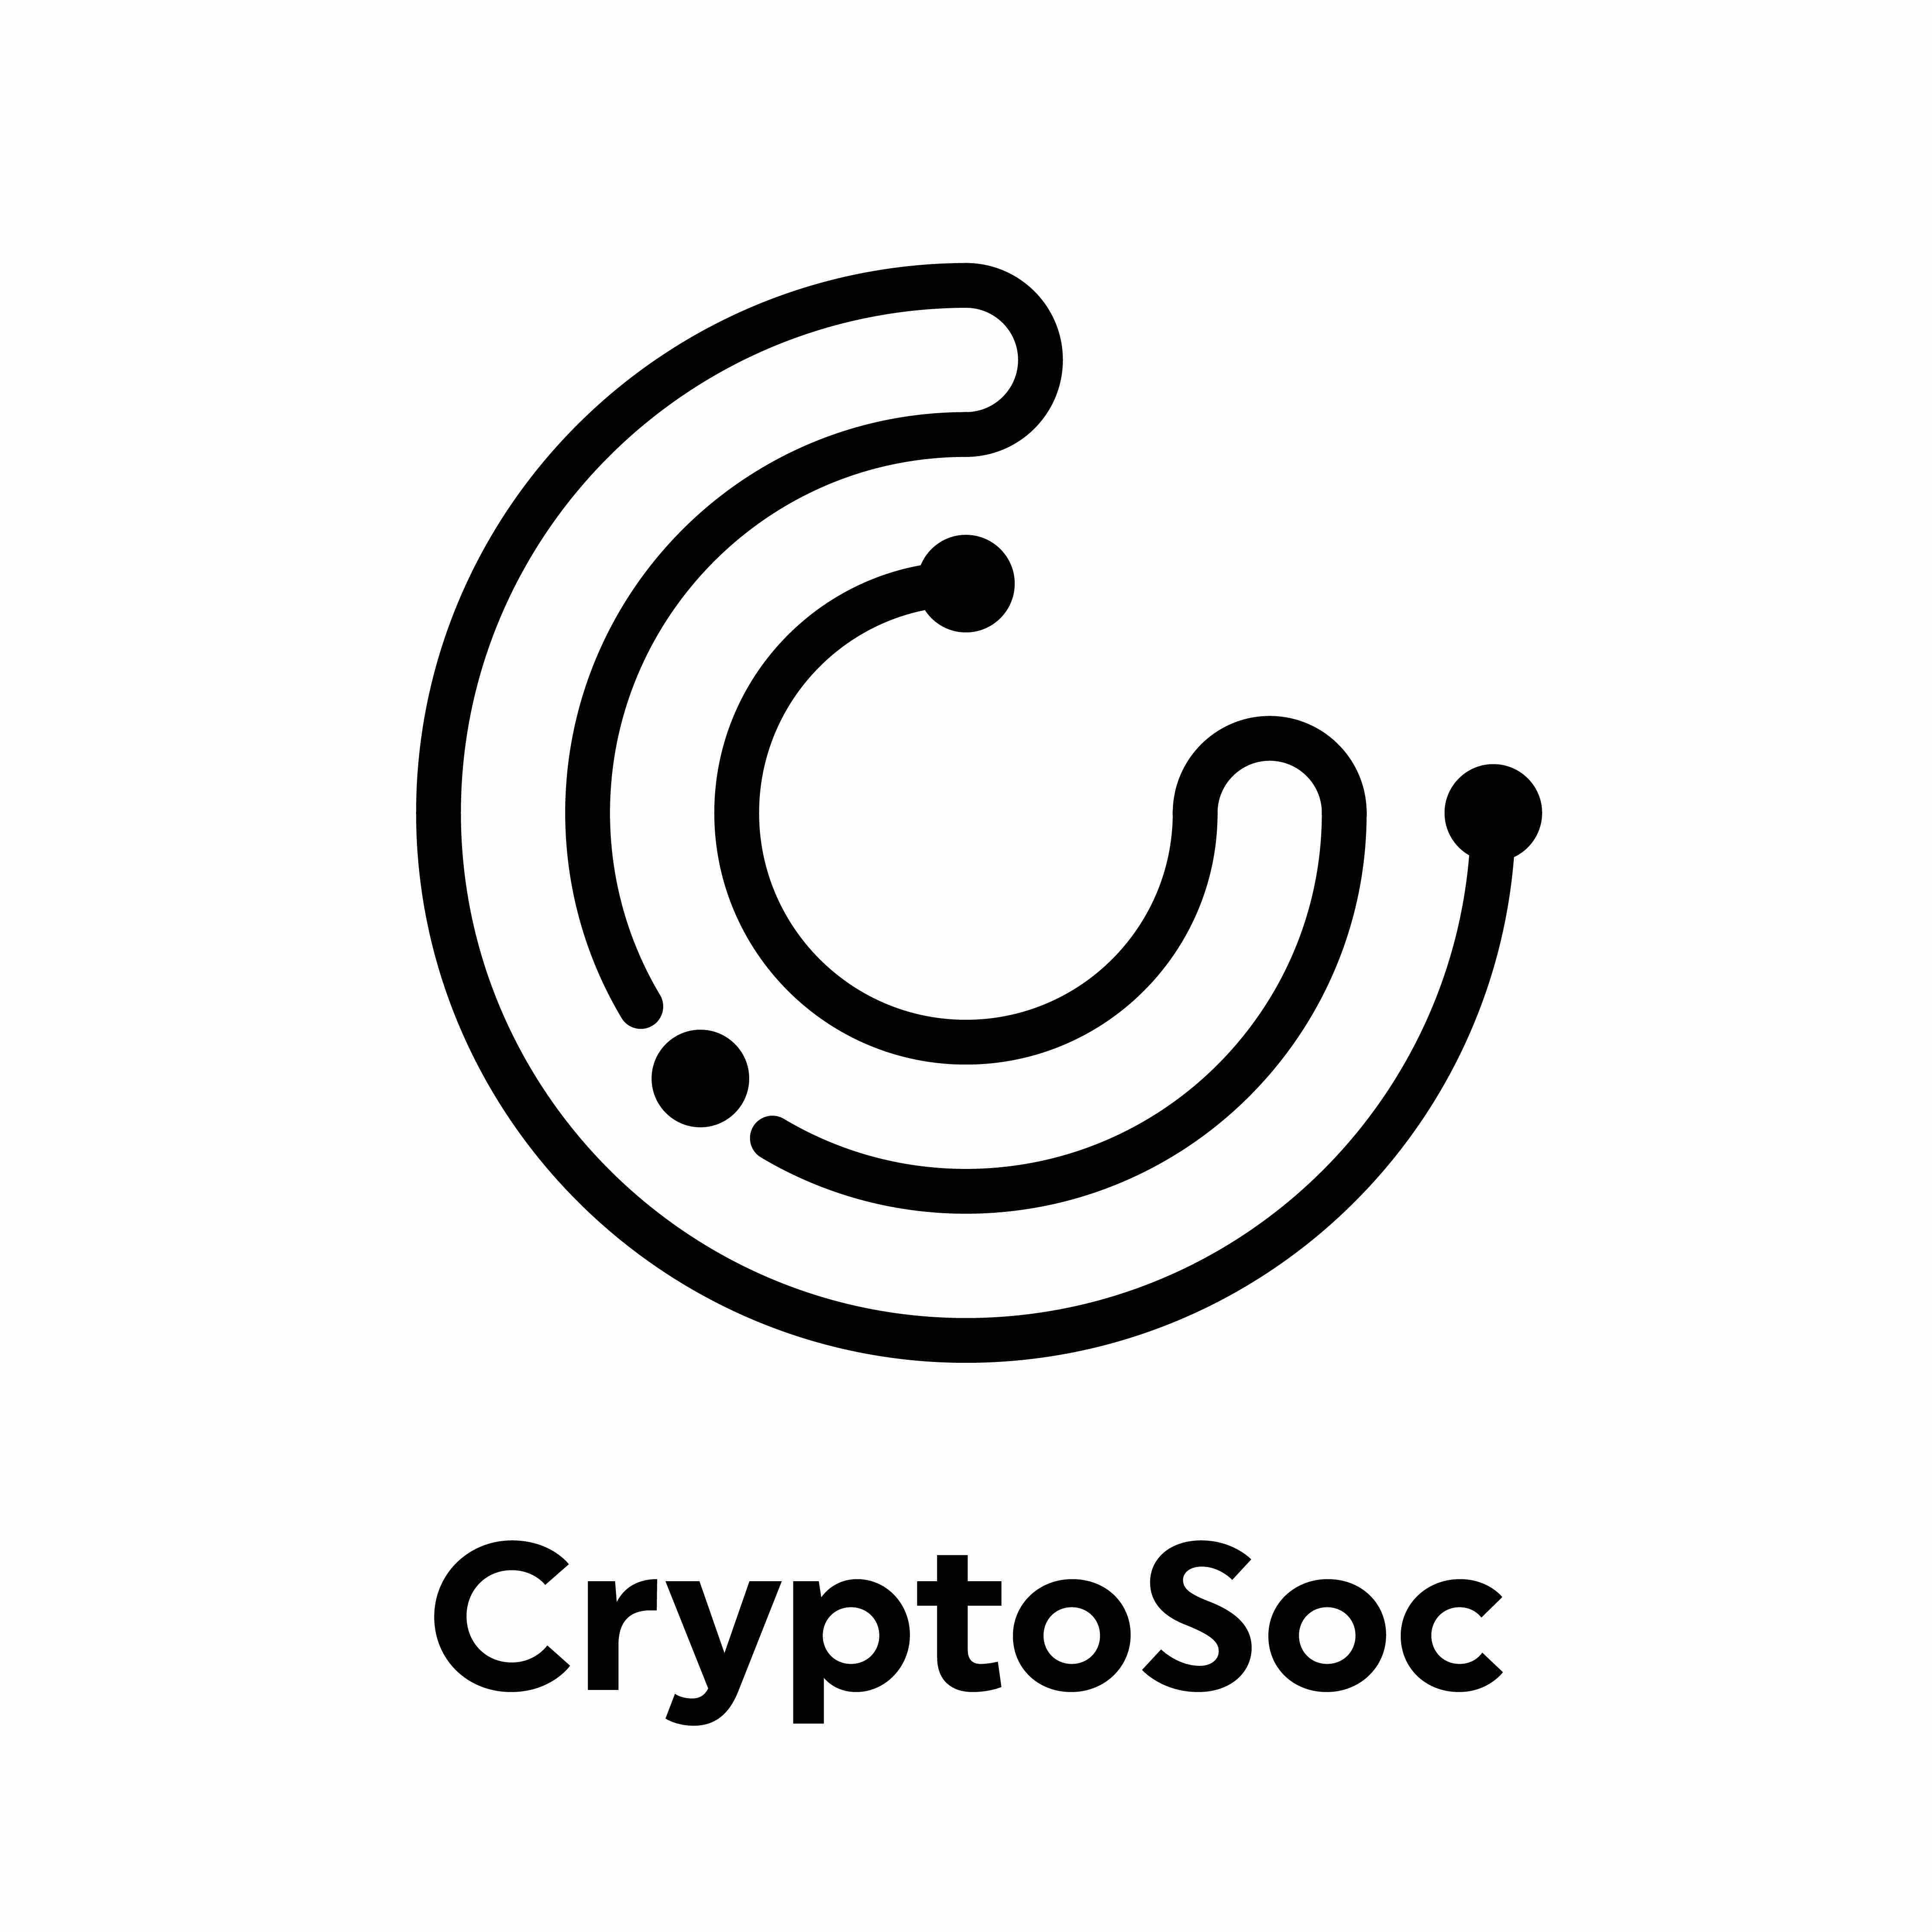 UCT Cryptocurrency and Artificial Intelligence Society